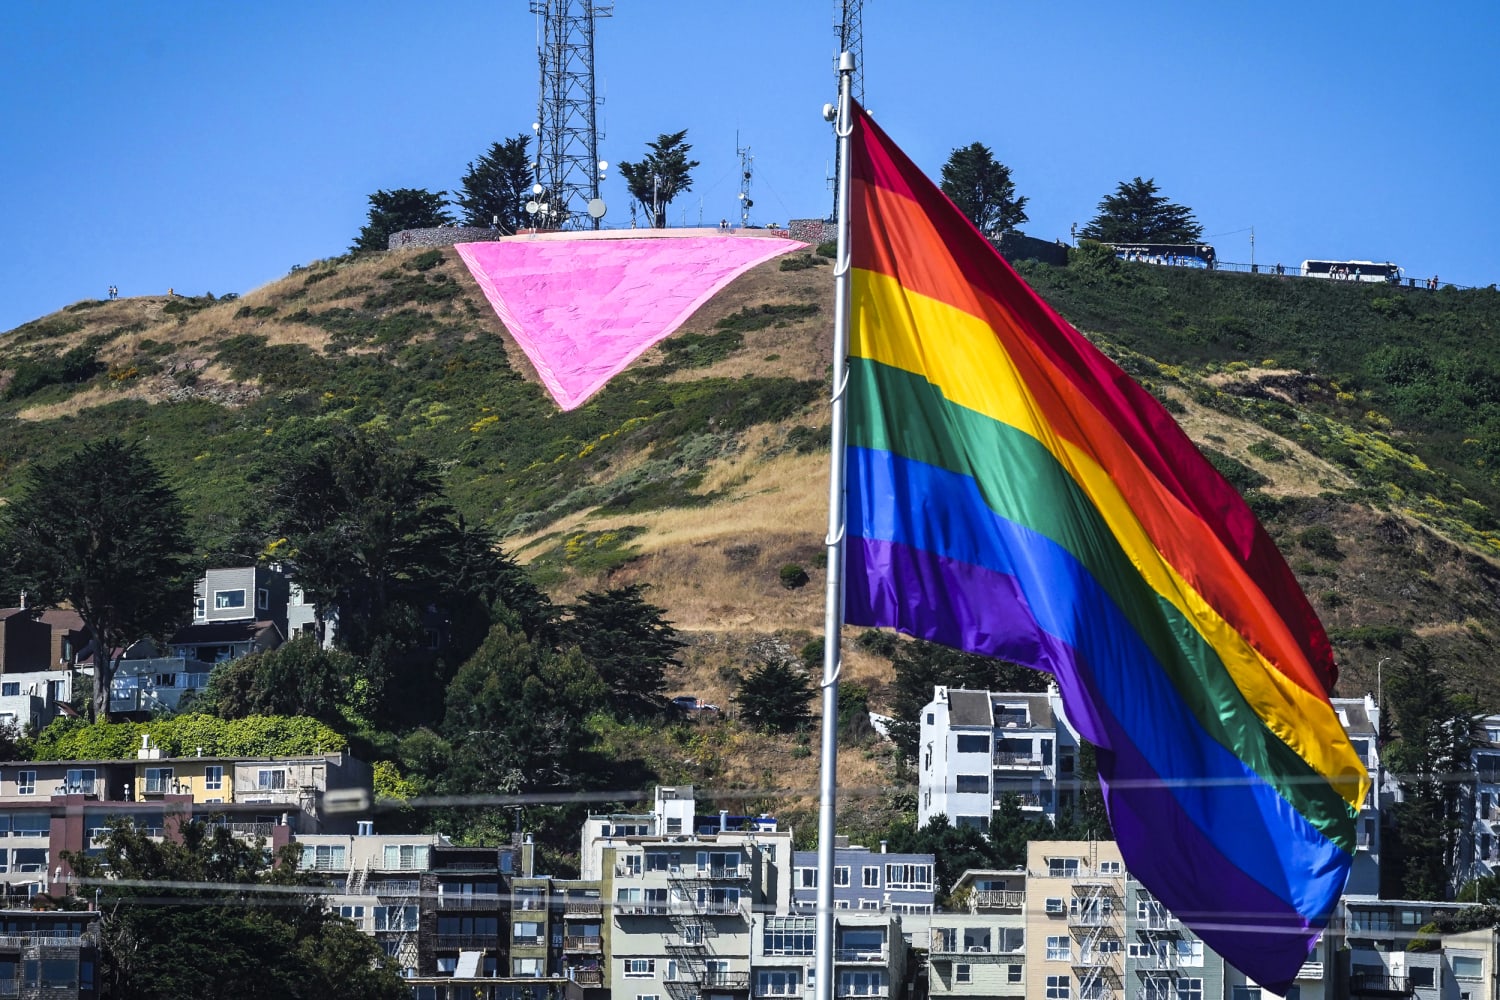 San Francisco displays the largest-ever pink triangle for Pride Month in a stand against pushback